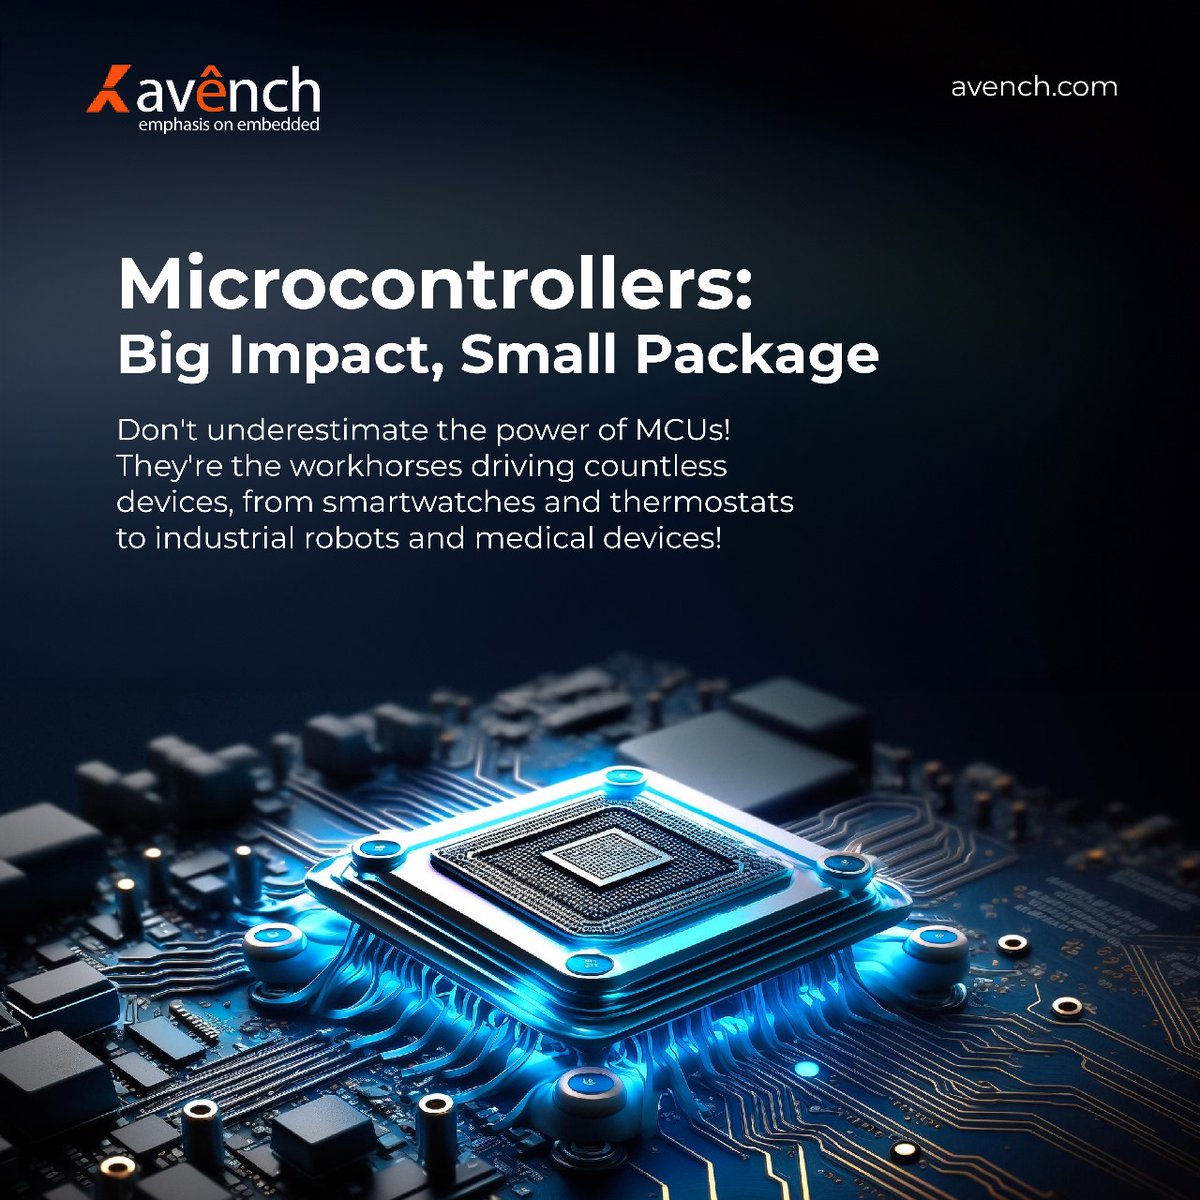 MCUs power embedded systems, excelling in I/O management, data processing, and programmed tasks, crucial for IoT with their low power use and compact size. avench.com #avenchsystem #embeddedsystems #IOTsystem #microcontrollers #TechnologyStrategy #TechConsultancy